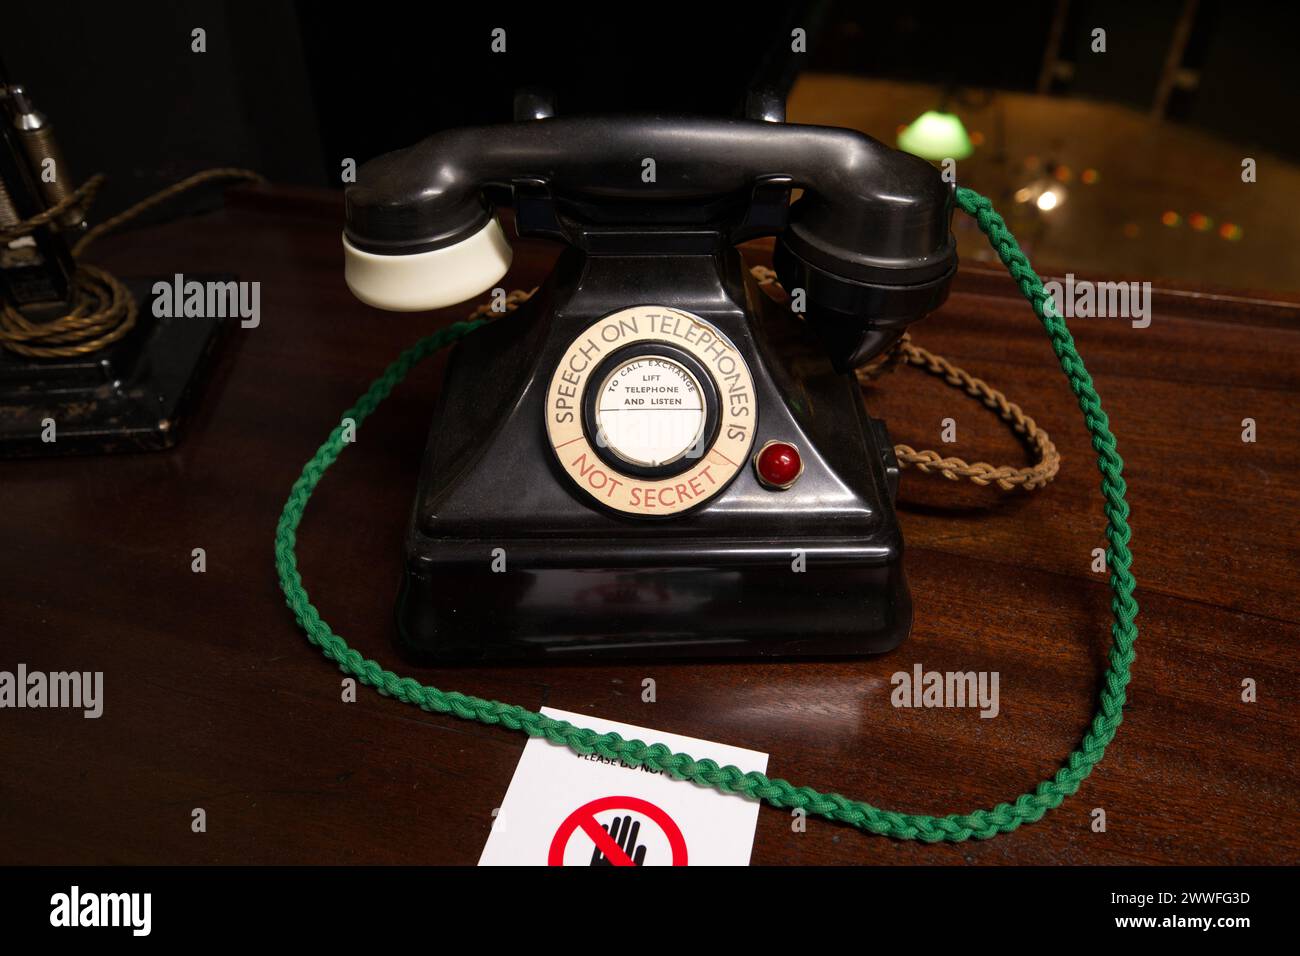 An unsecured telephone in the Battle of Britain Bunker Stock Photo